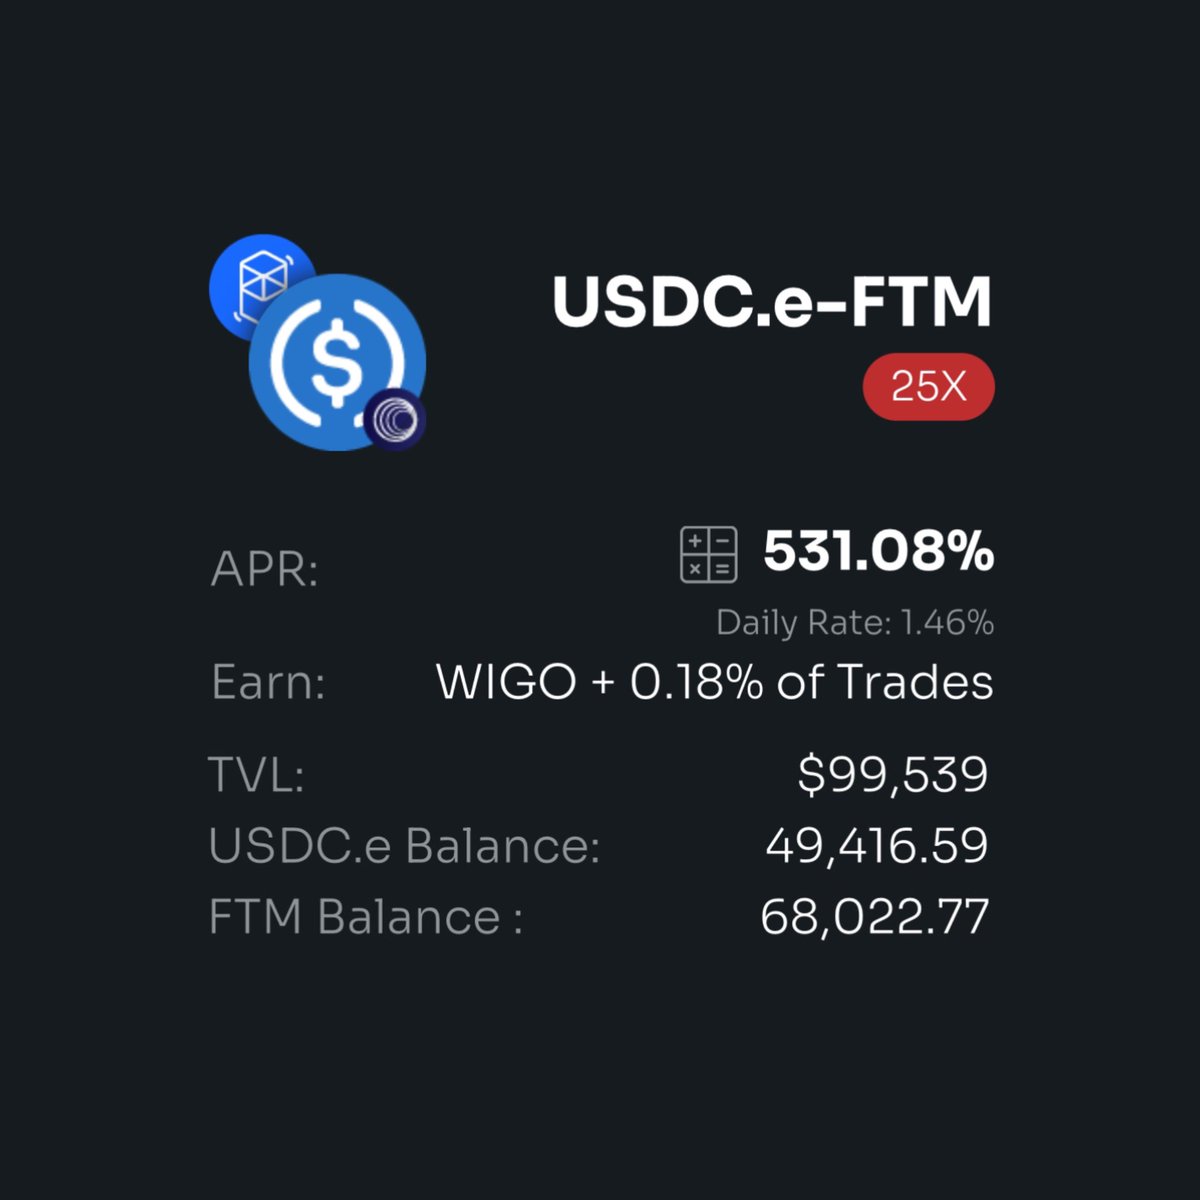 Just hours after announcing our USDC.e farm on @WigoSwap, a massive $100,000 flooded into the liquidity pool. The incredible response from our amazing #DeFi community is truly humbling.

The farm is still fresh - who's next to stake their tokens and earn rewarding yields? 

Join